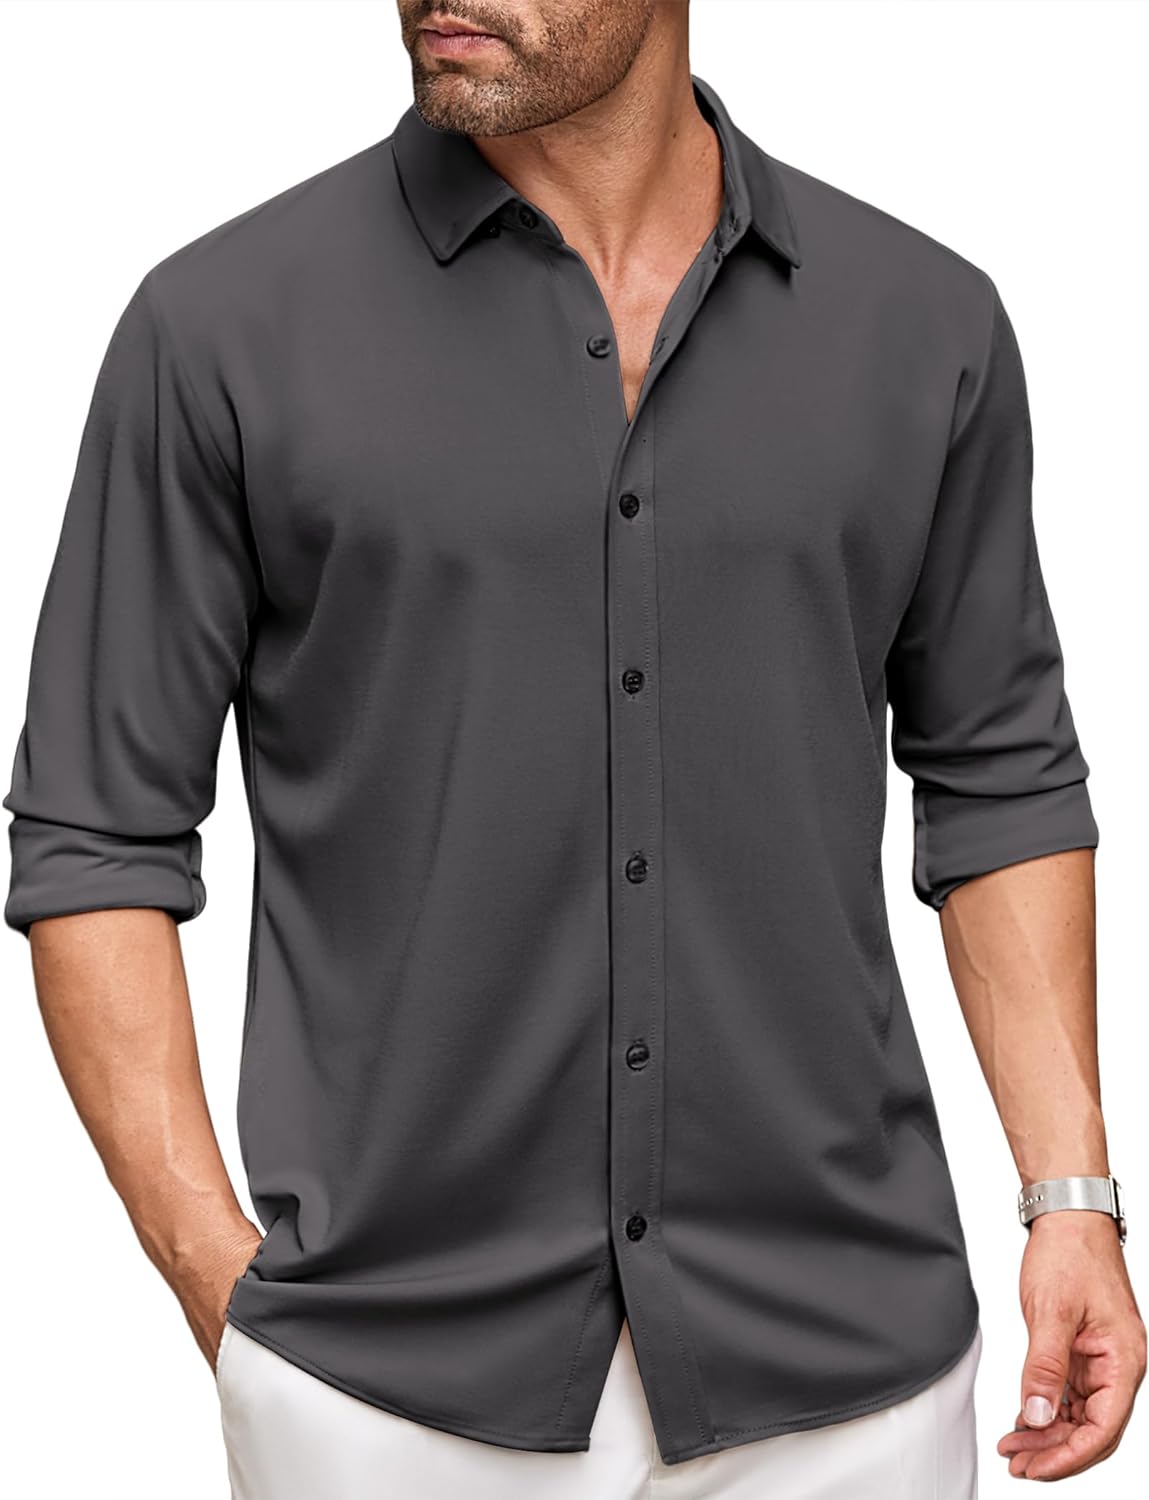  COOFANDY Men's Dress Shirts Short Sleeve Casual Button Down  Shirt Muscl Fit Dress Shirts Wrinkle-Free Black : Clothing, Shoes & Jewelry